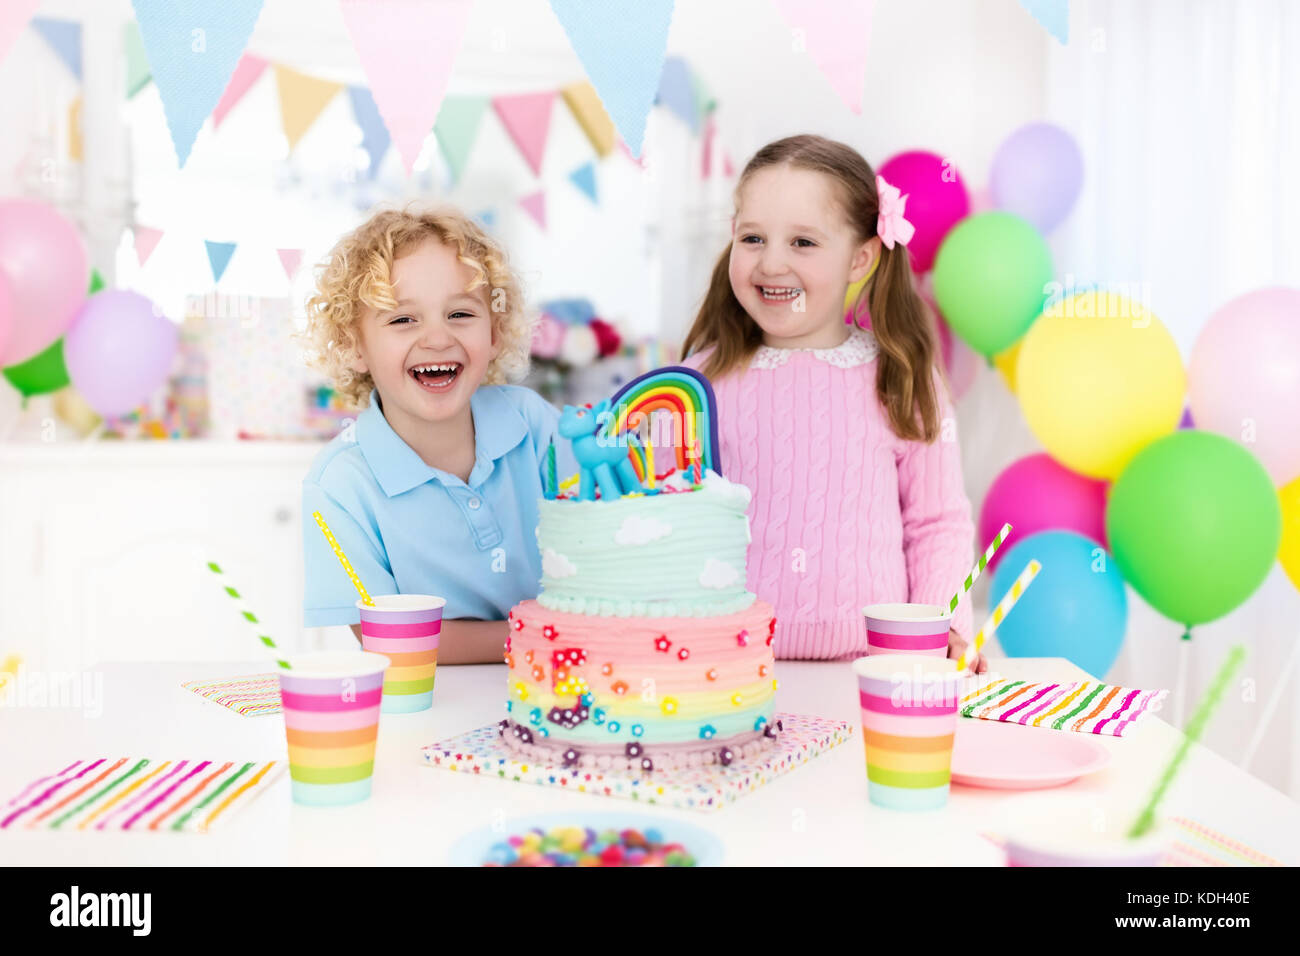 Kids birthday party with colorful pastel decoration and rainbow cake. Girl and boy with sweets, candy and fruit. Balloons and banner at festive decora Stock Photo